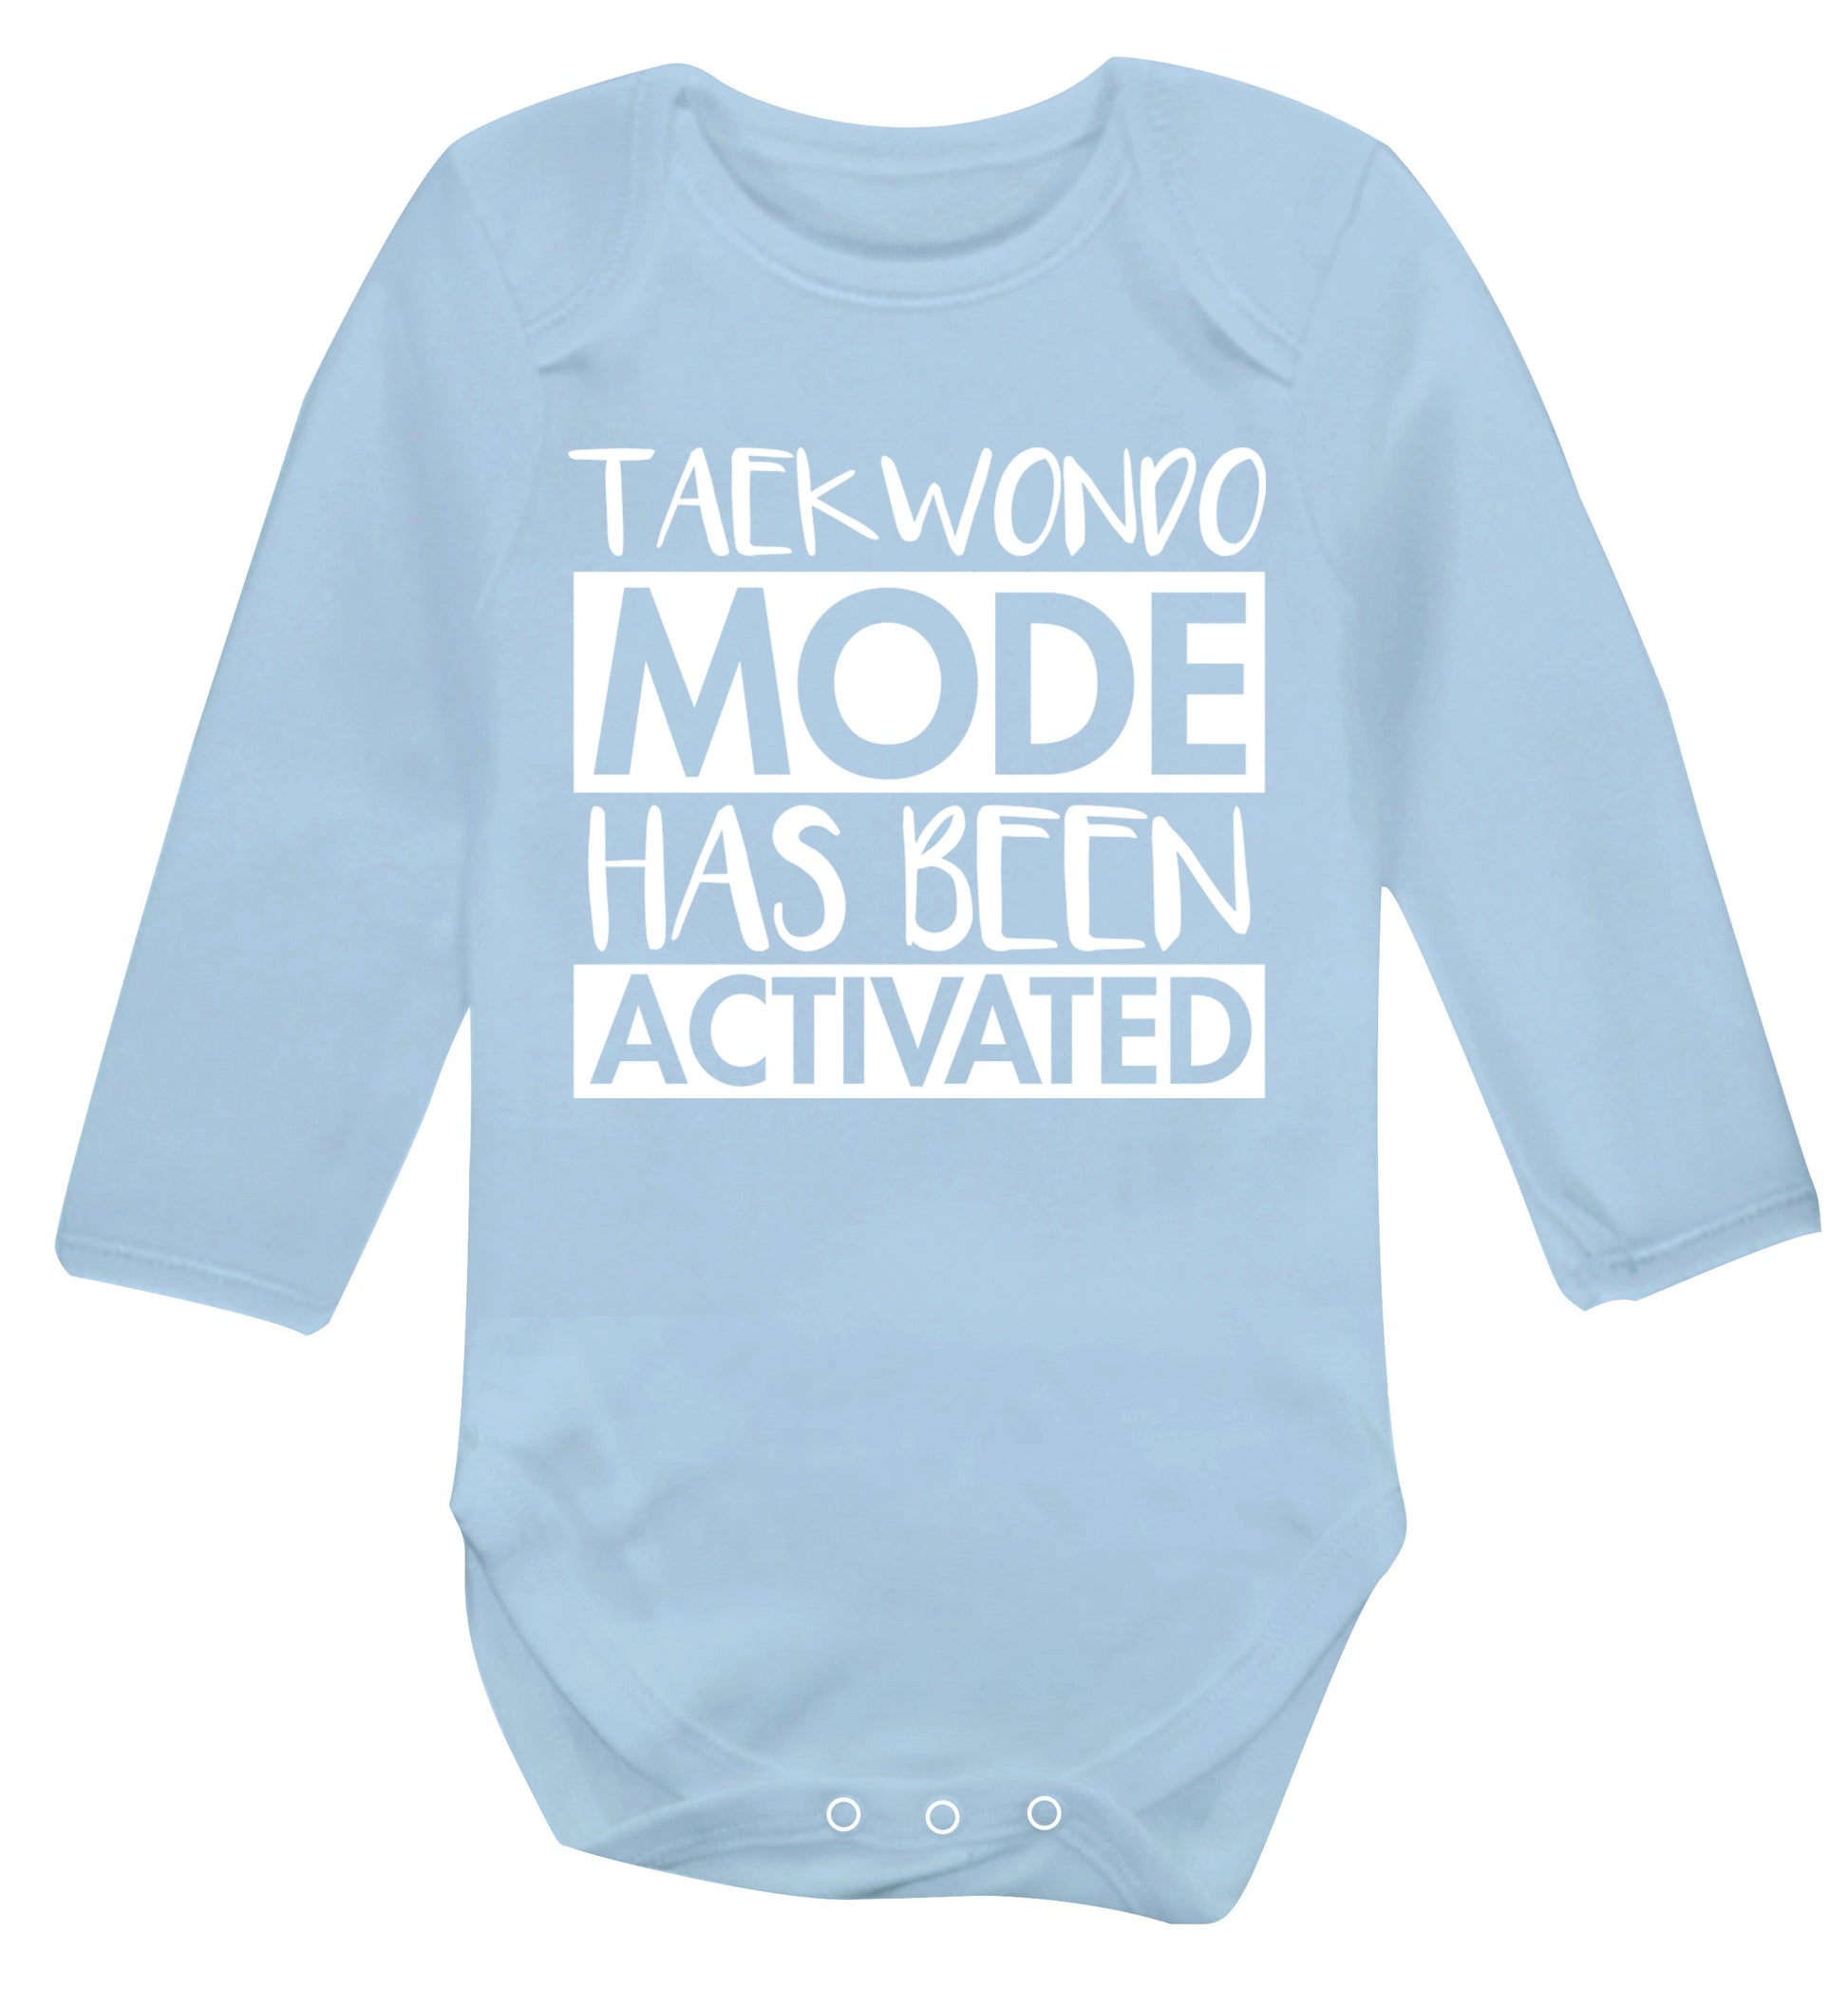 Taekwondo mode activated Baby Vest long sleeved pale blue 6-12 months